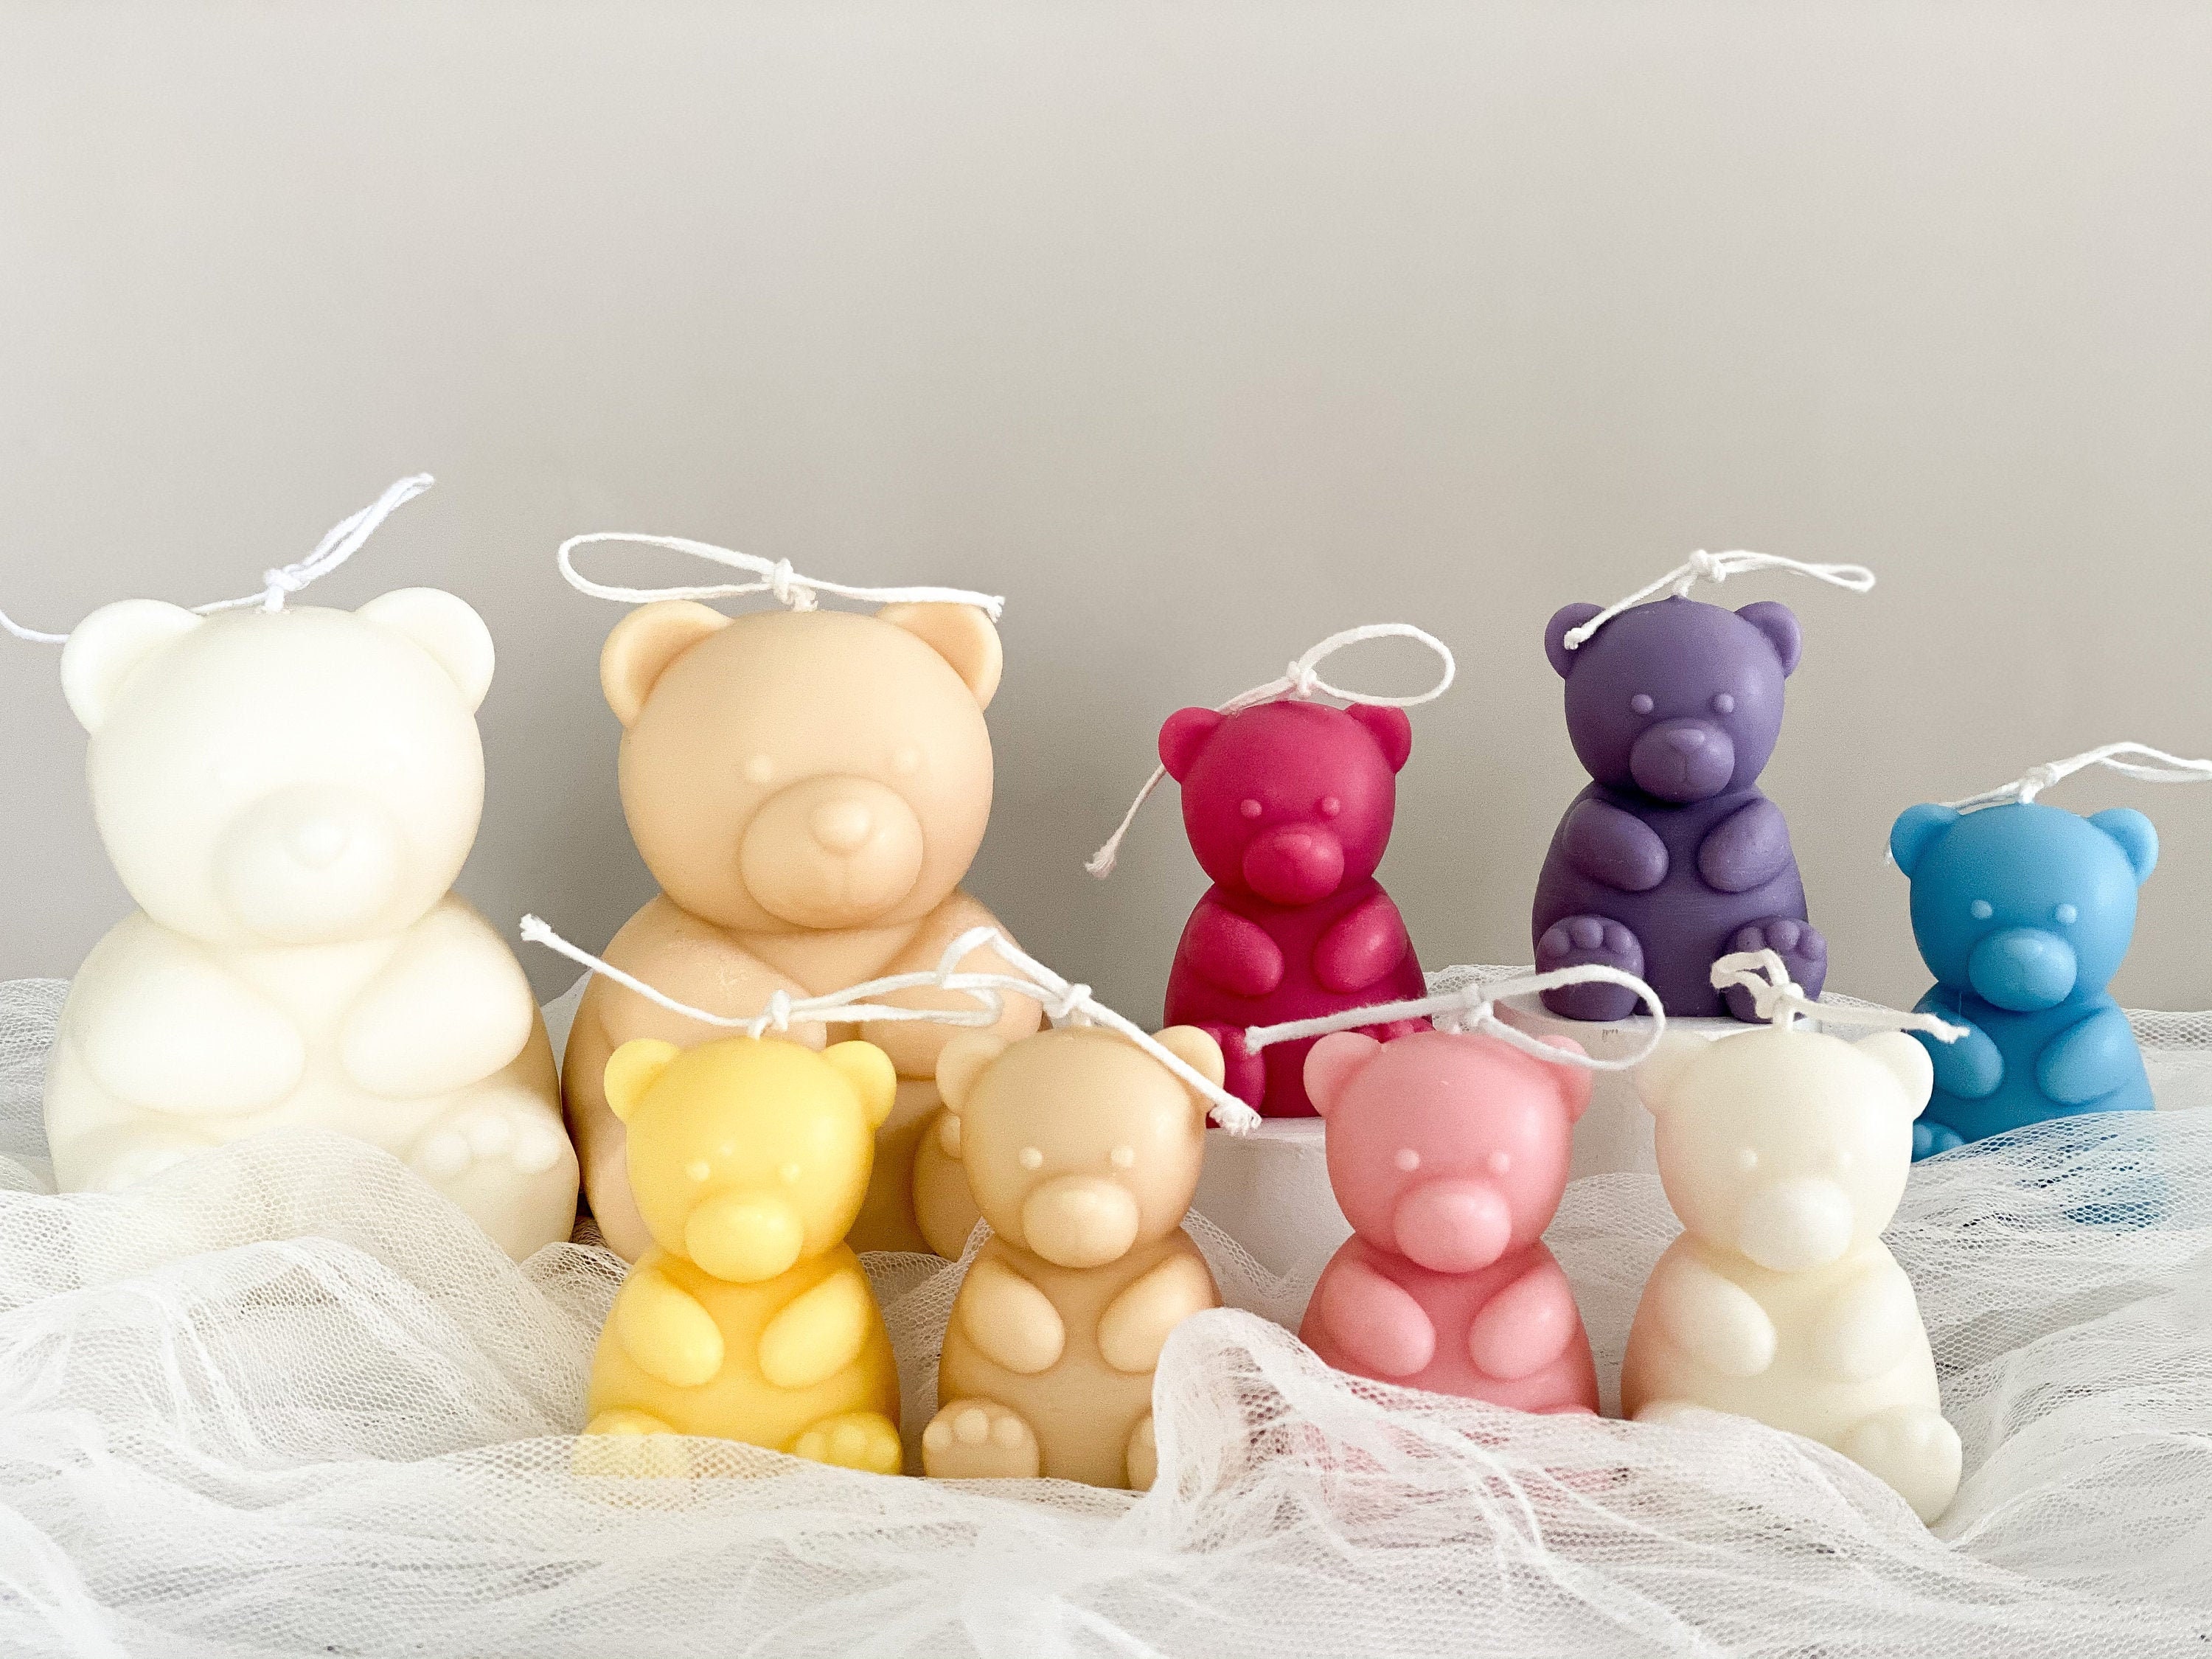 Cute Bear Candles Christmas Collection Gift for Her Decorative Candle Soy  Wax Teddy Bear Scented Candles home Decorminimalist 